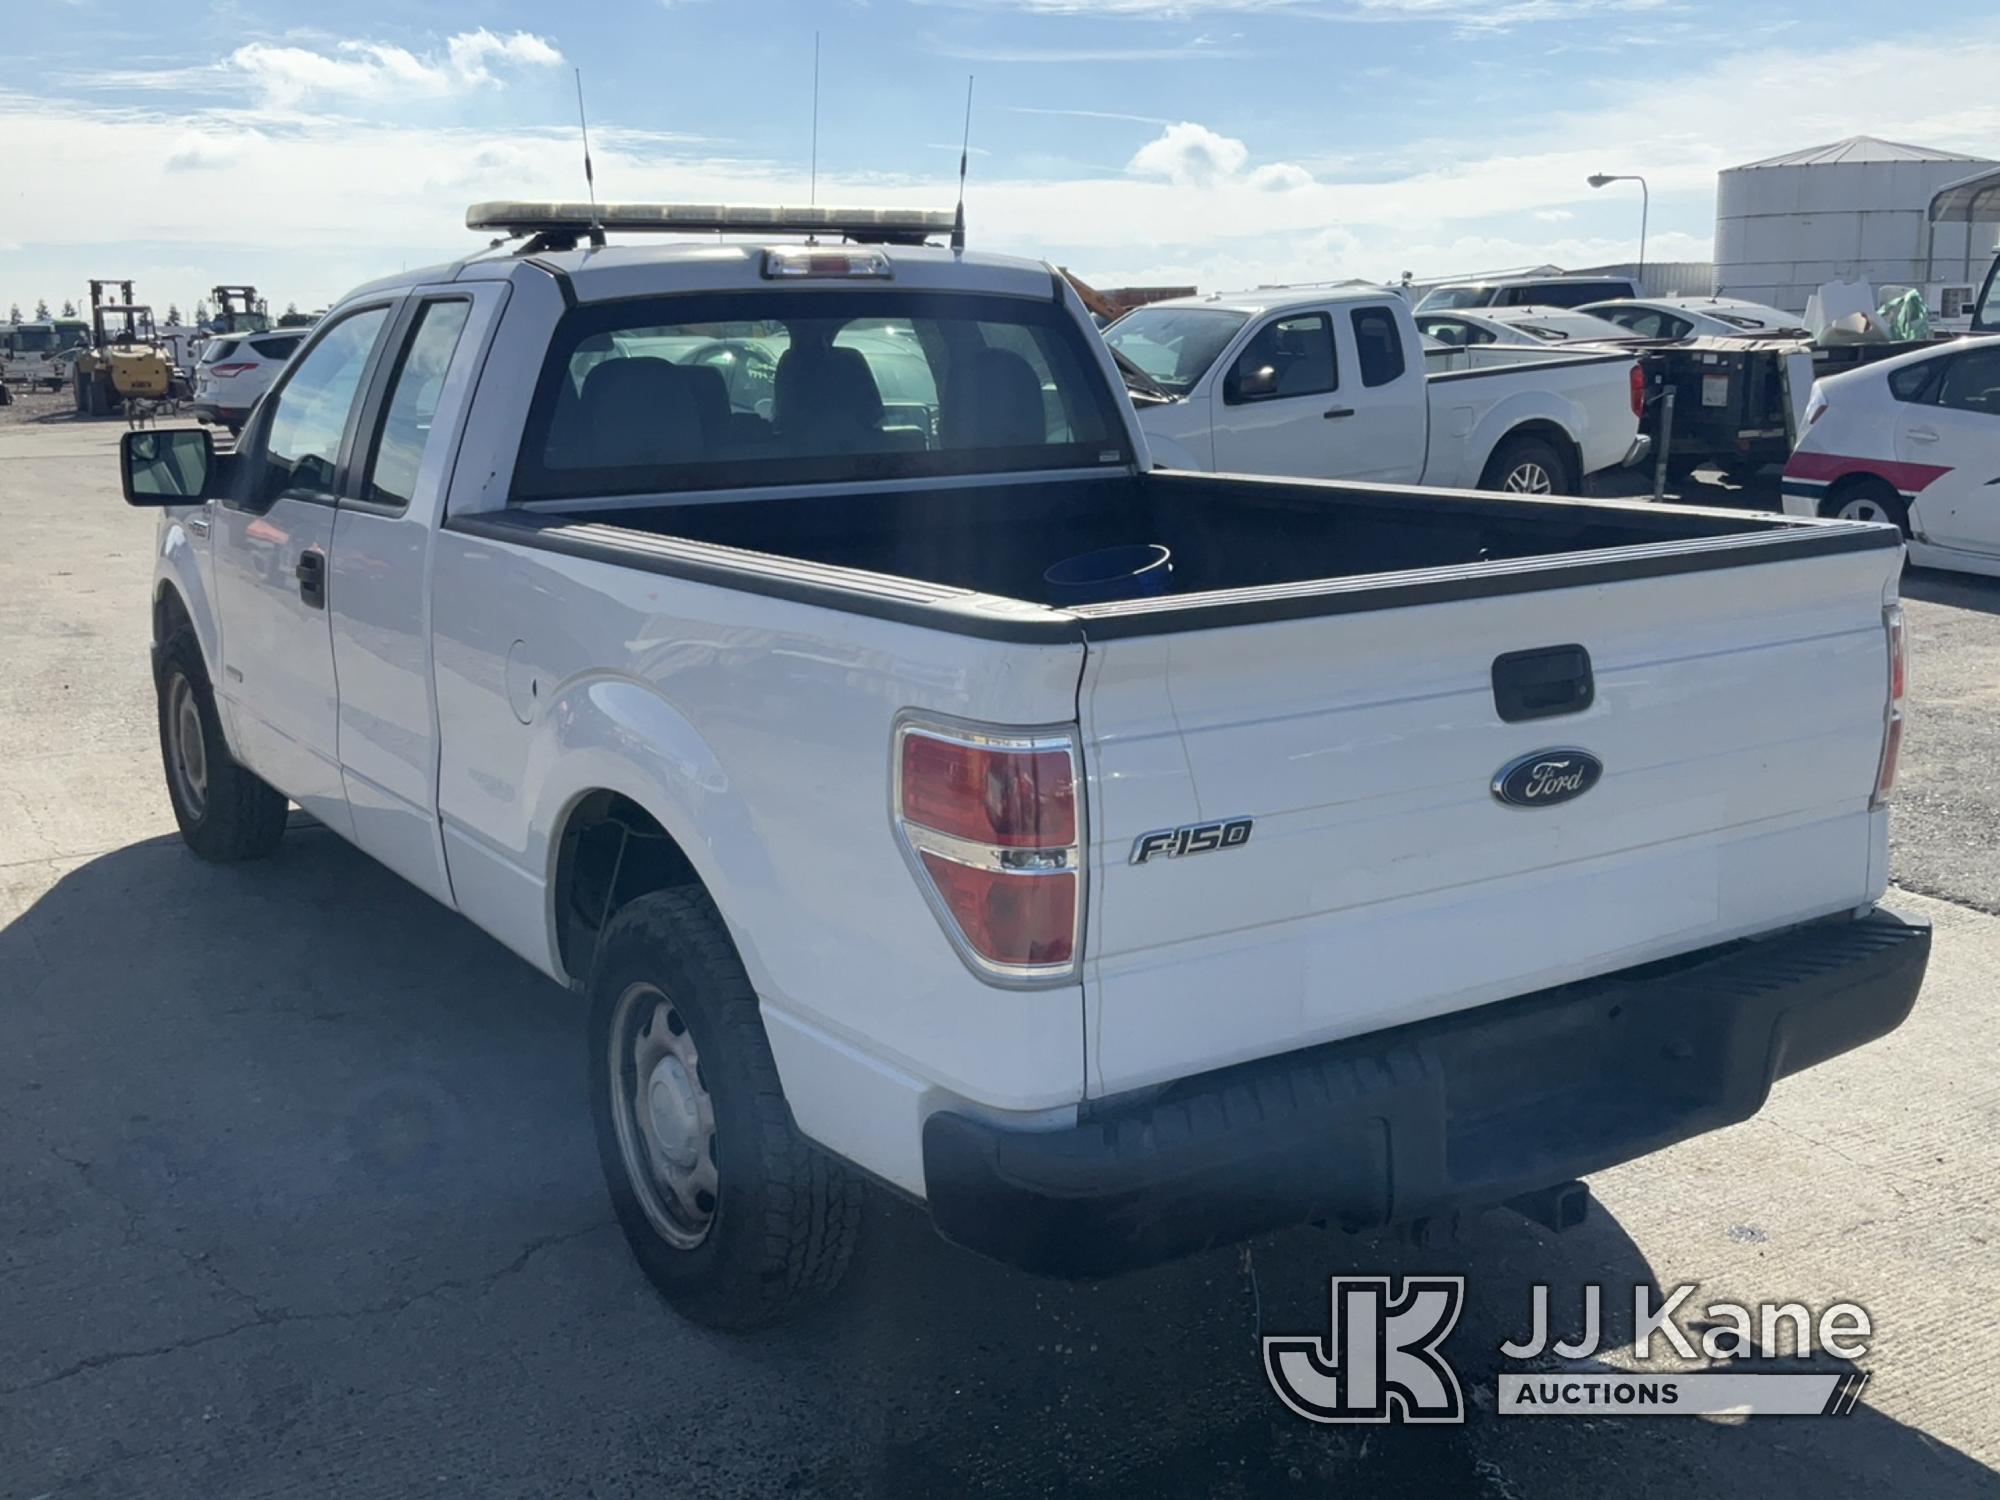 (Dixon, CA) 2014 Ford F150 Extended-Cab Pickup Truck Runs & Moves) (Paint Damage On Passenger Bed Si